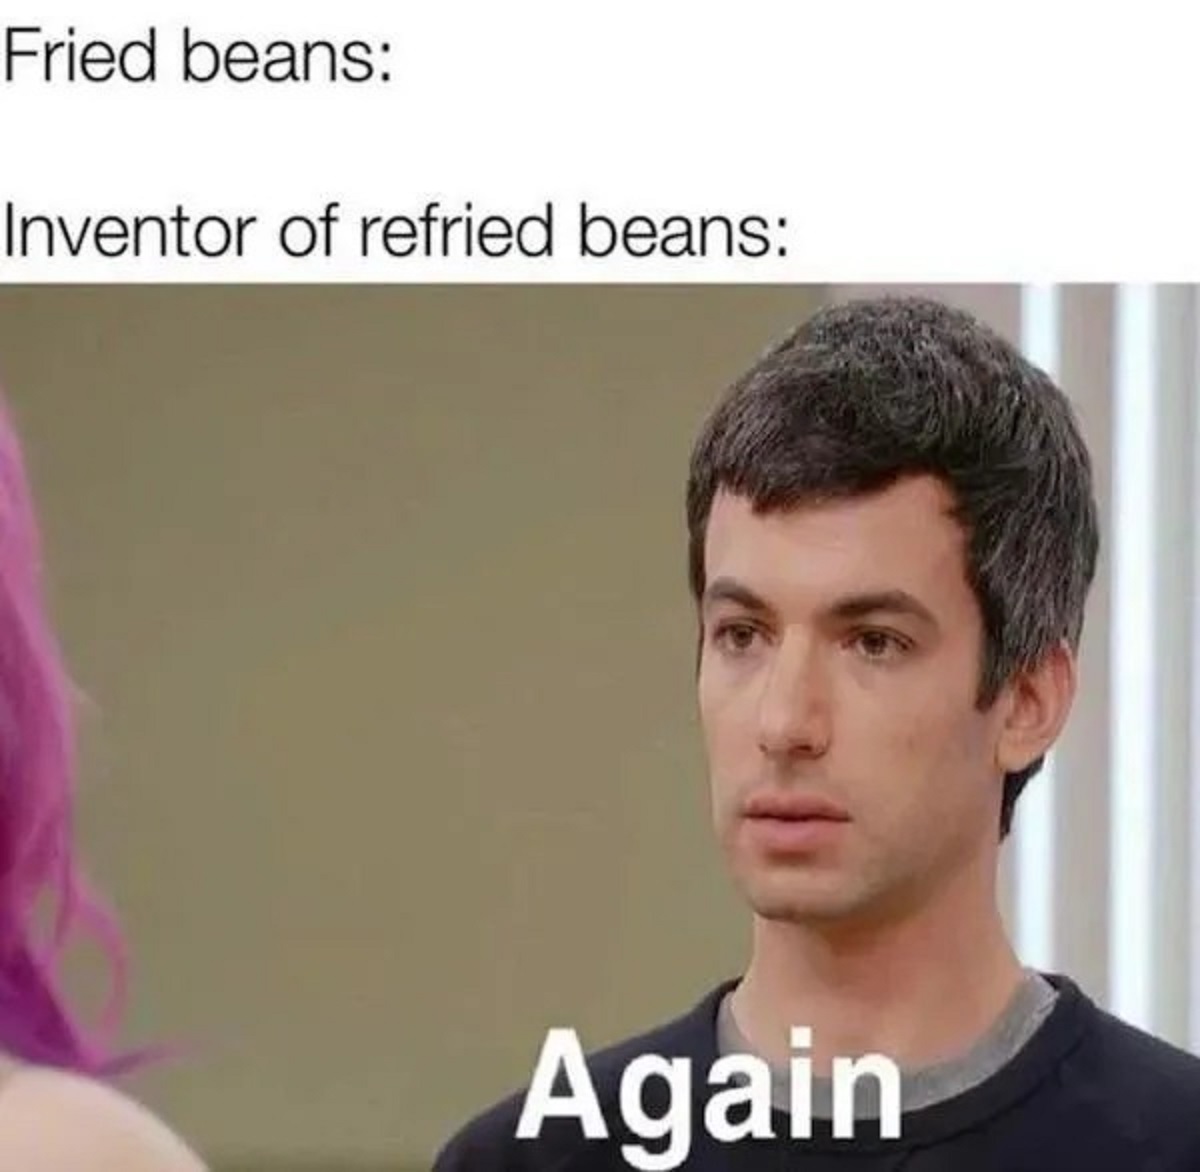 boy - Fried beans Inventor of refried beans Again